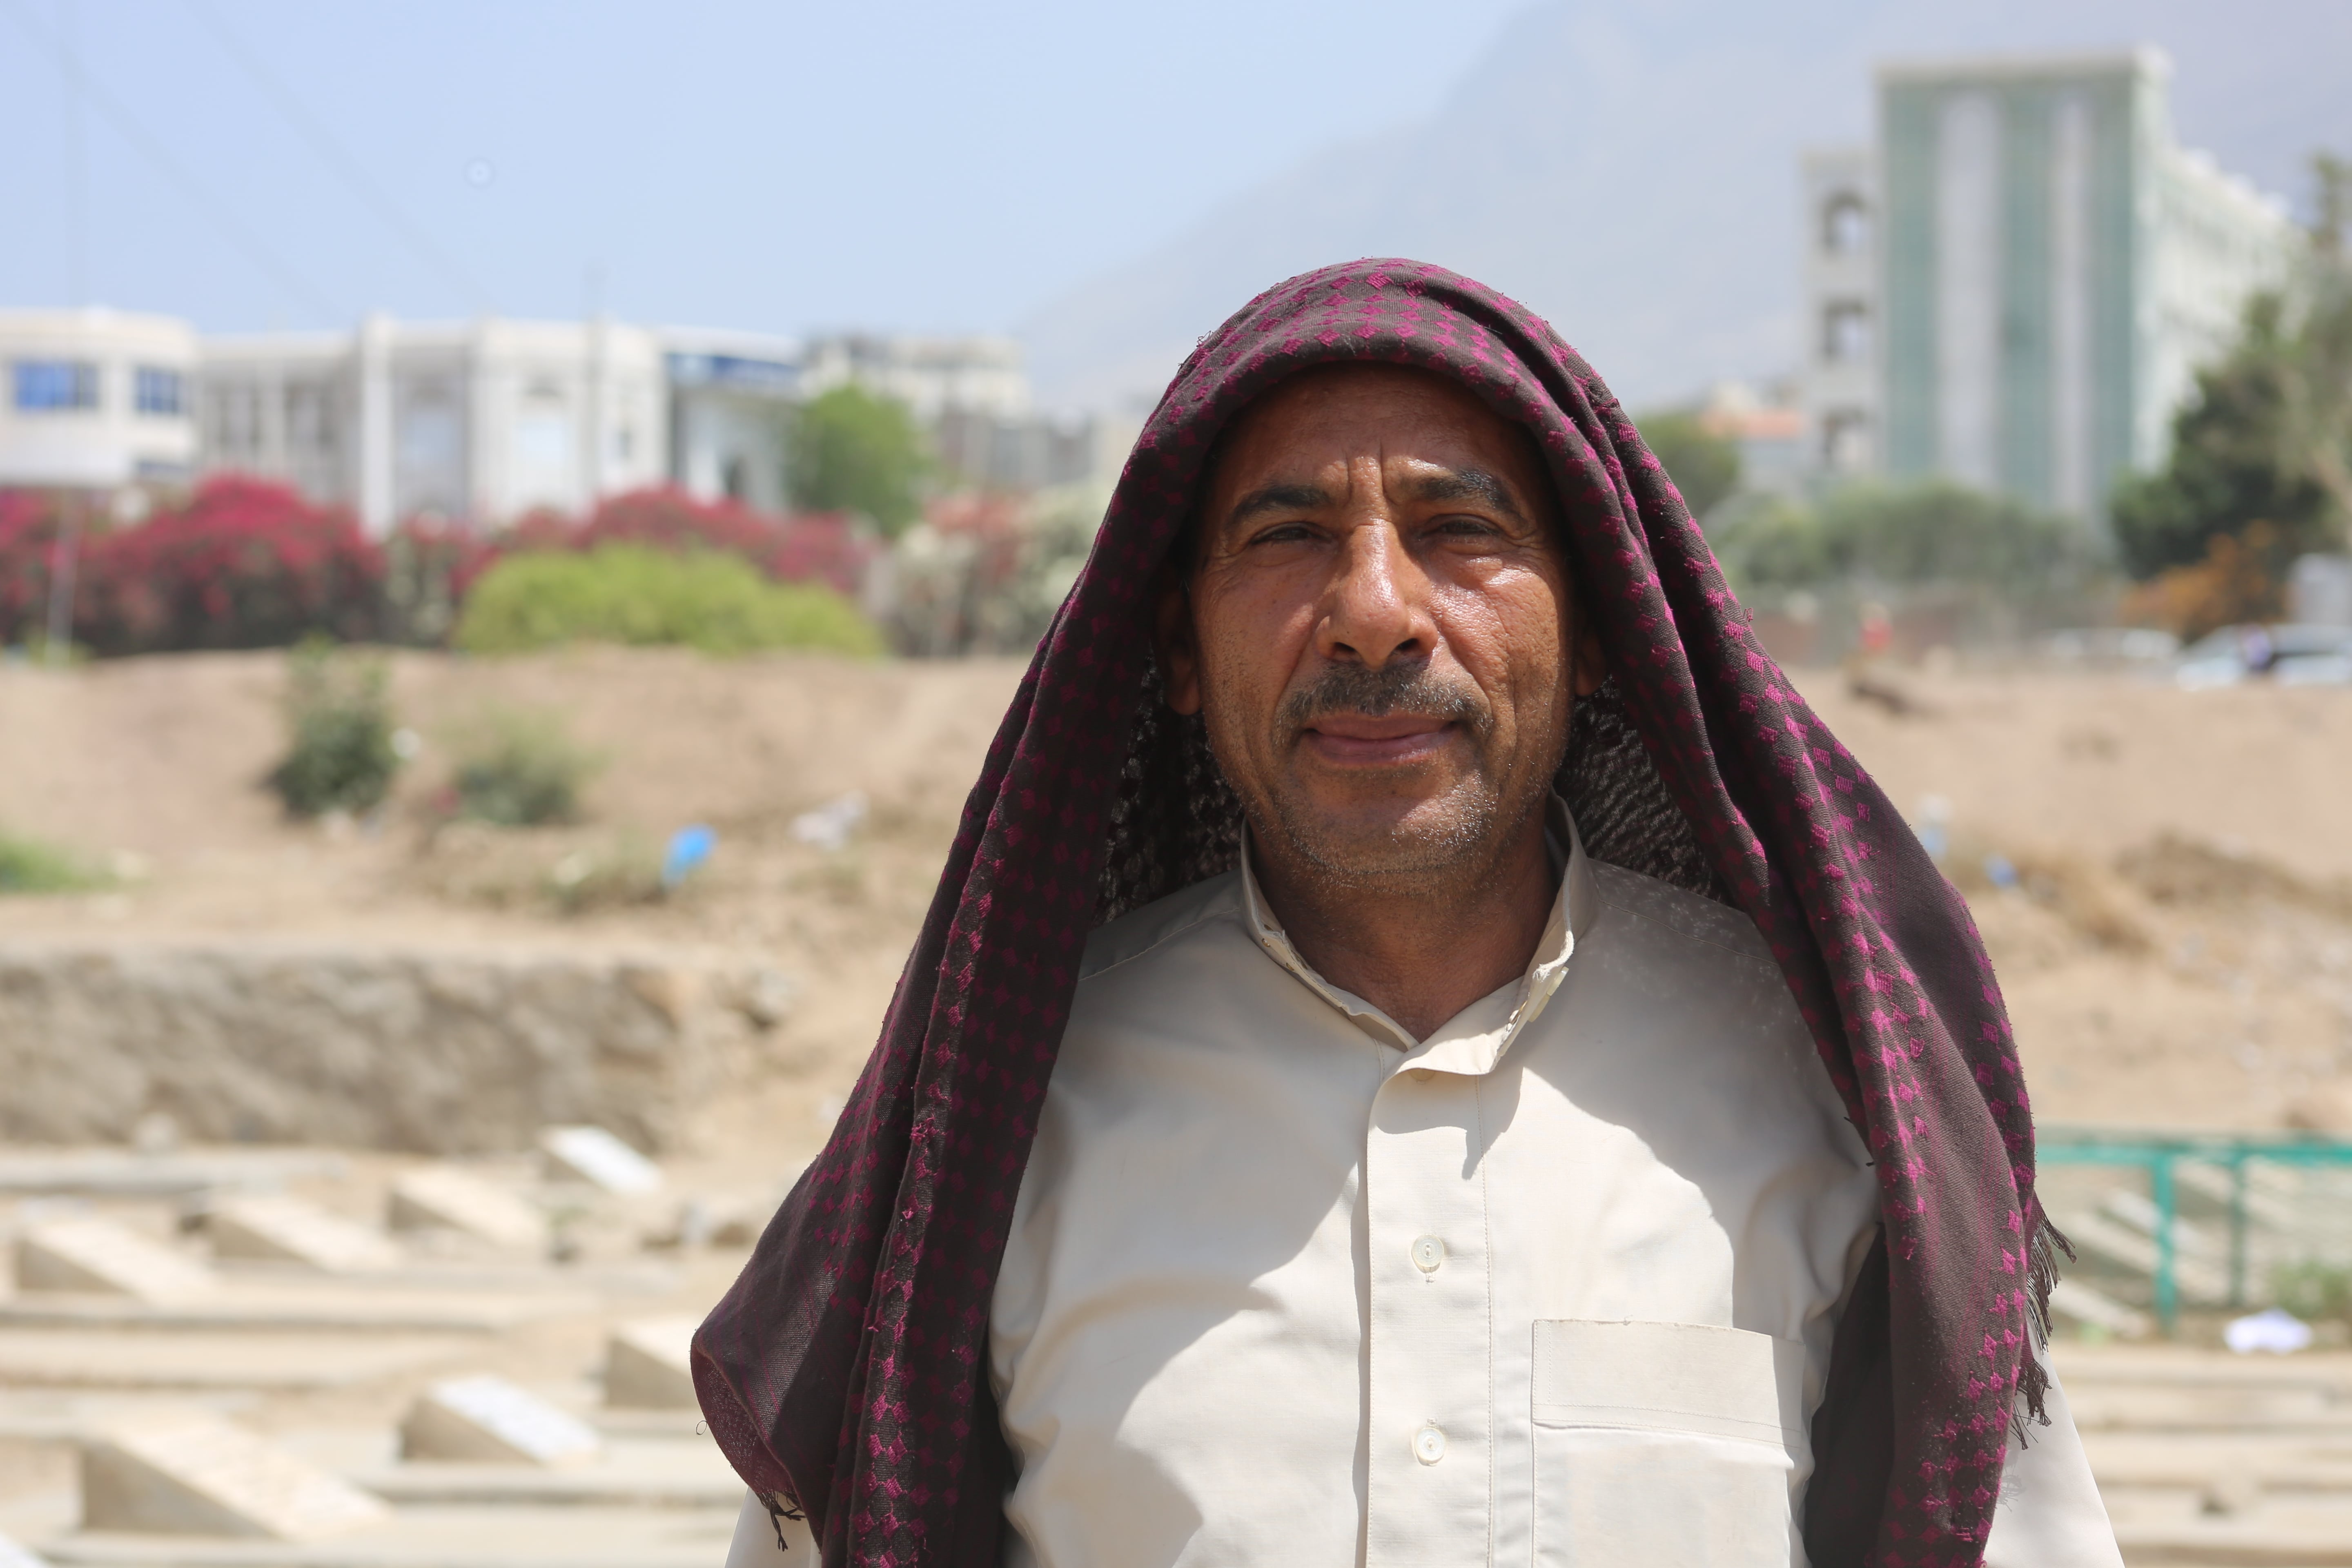 Mohammed Ismail, 60, is less doubtful about getting vaccinated. (Khalid Al-Banna for MEE)